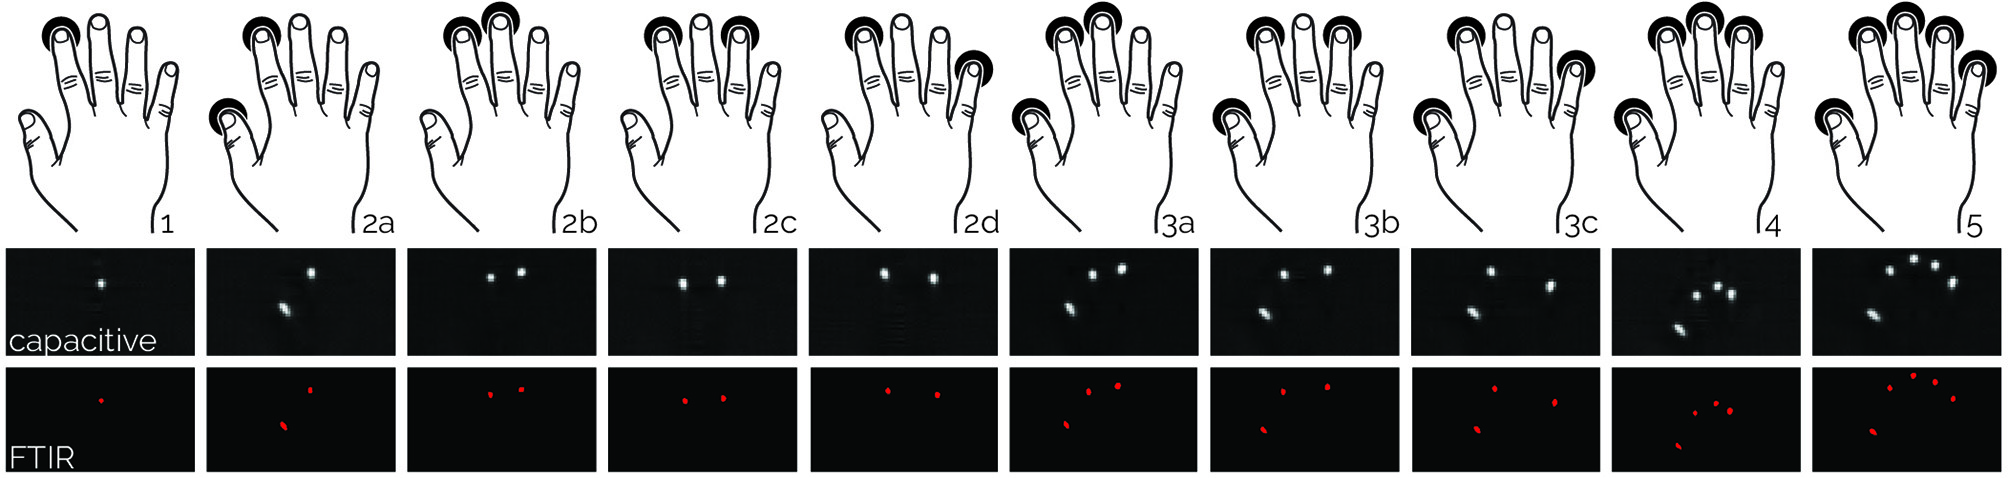 hand poses used for data collection to train CapContact's super-resolution network